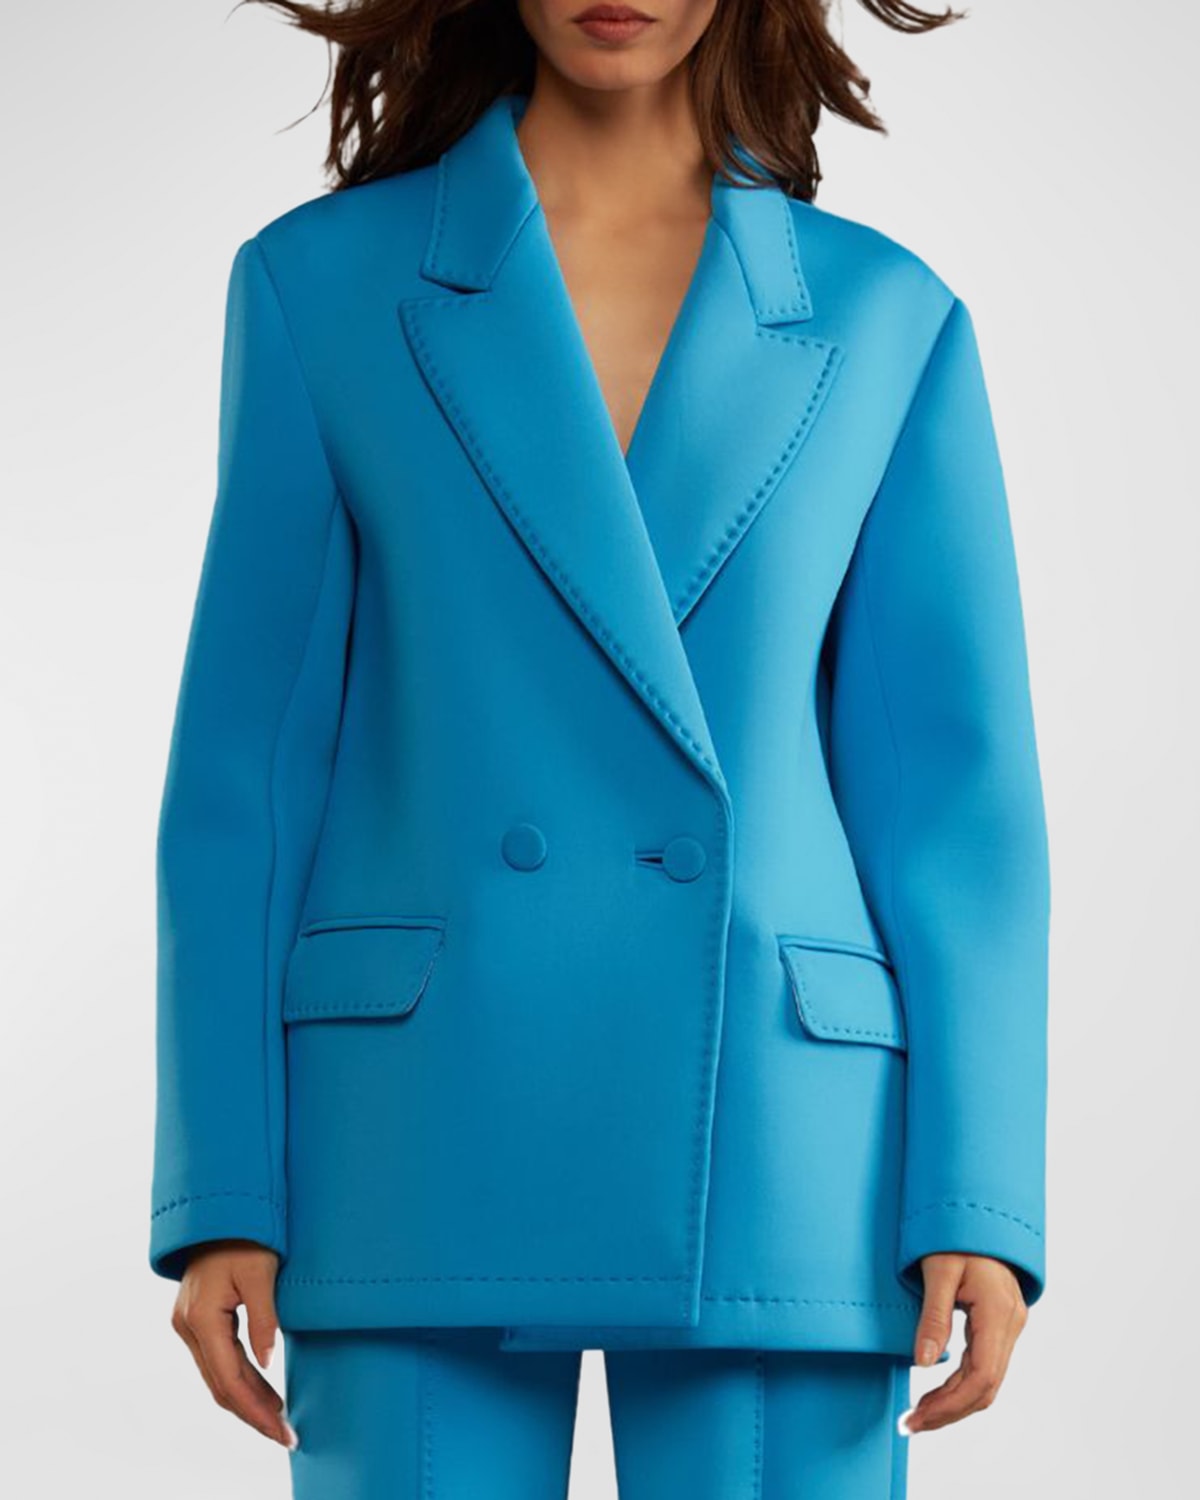 CYNTHIA ROWLEY DOUBLE-BREASTED PICK STITCH JACKET